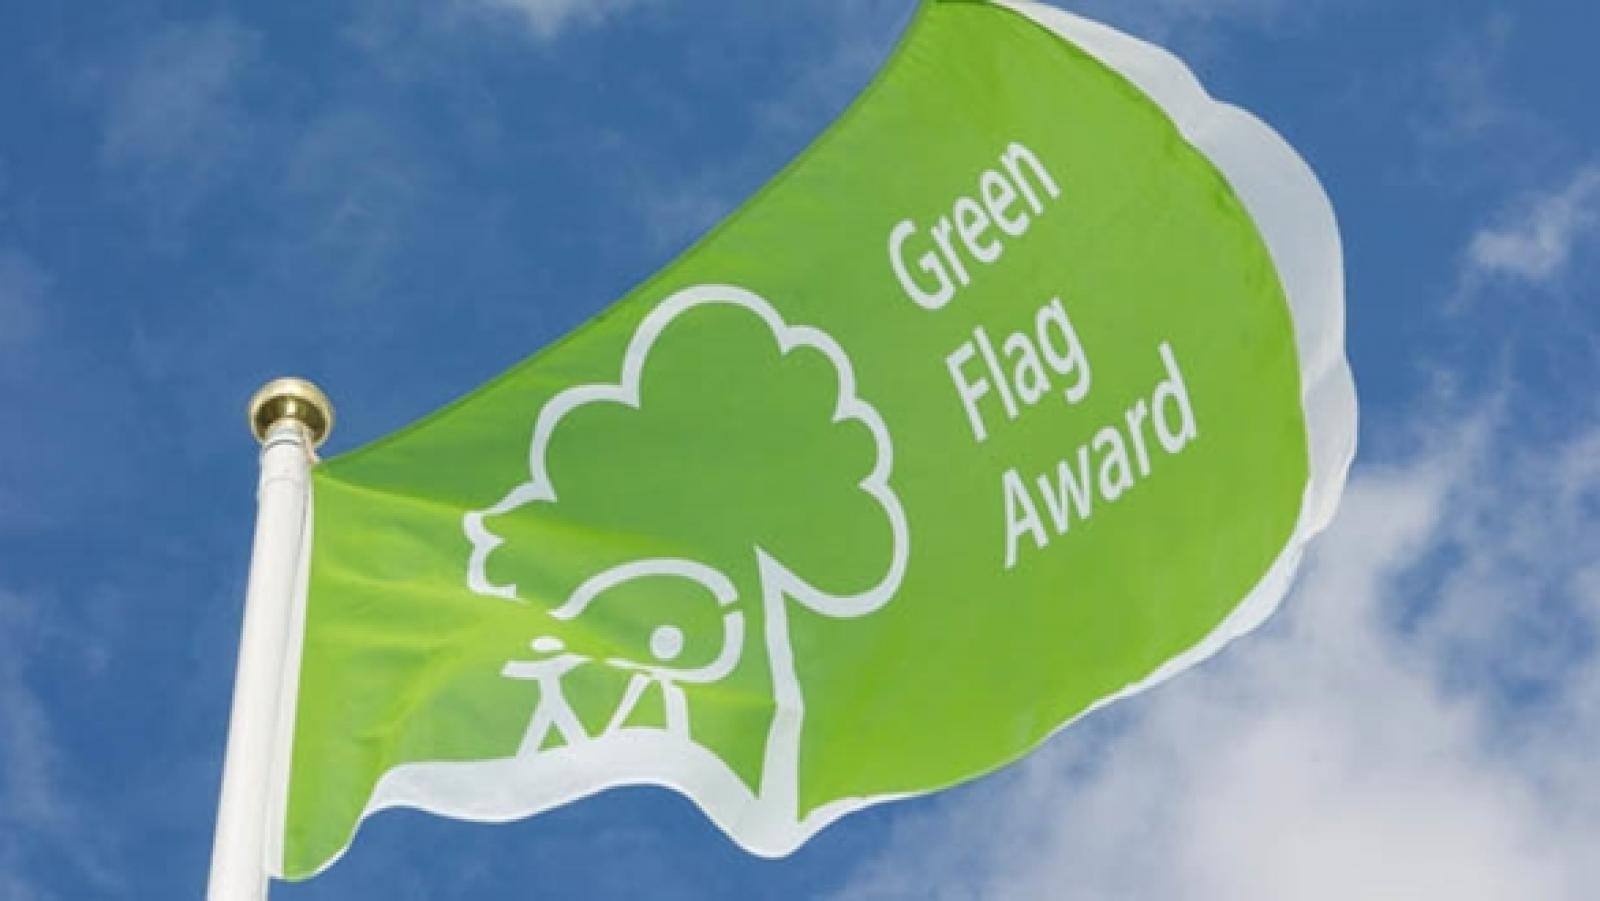 Green Flag for being one of Ireland’s top parks and best gardens